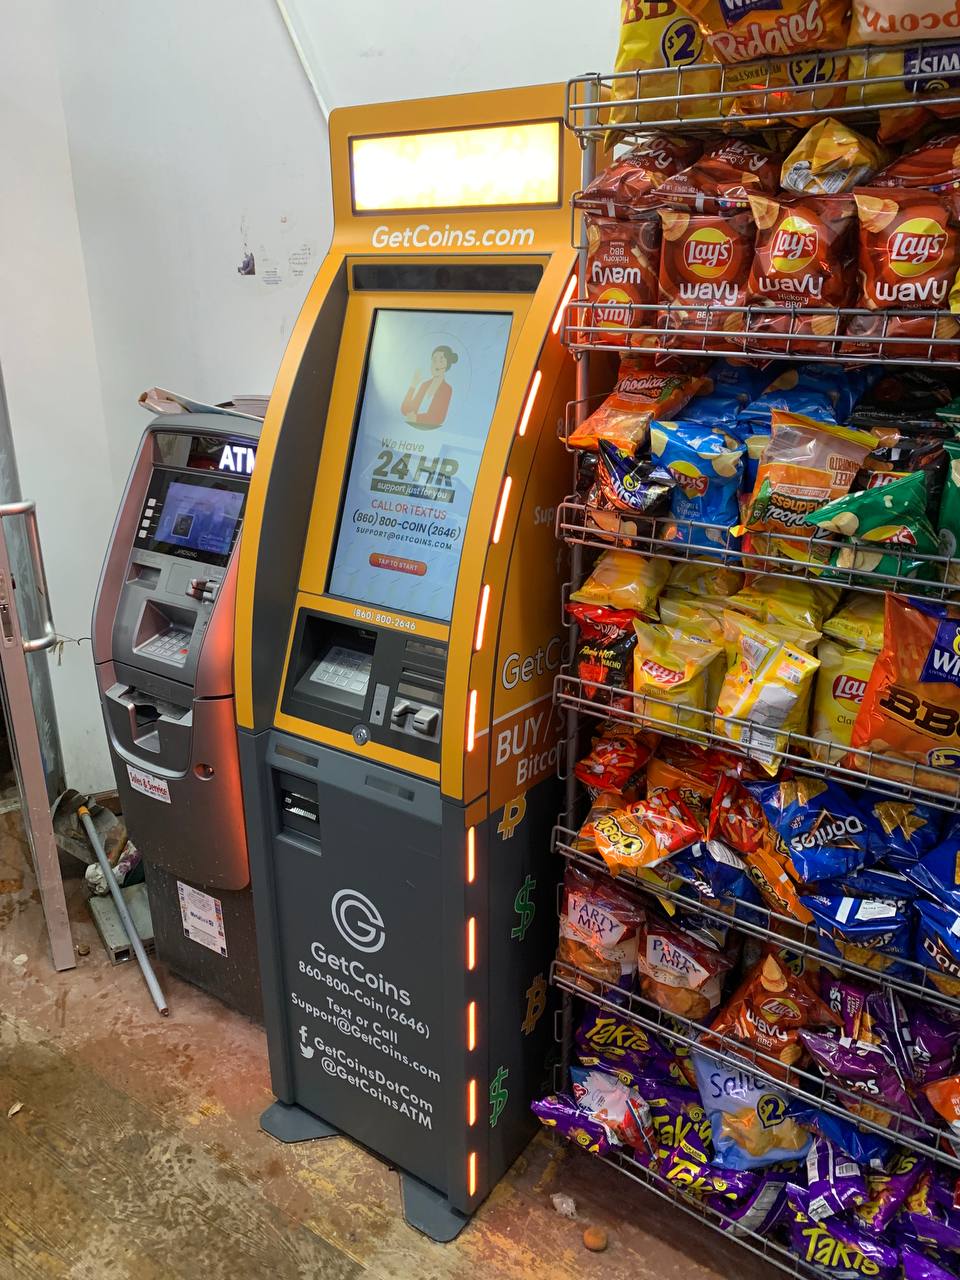 Getcoins - Bitcoin ATM - Inside of Al Amir George Grocery in Jersey City, New Jersey